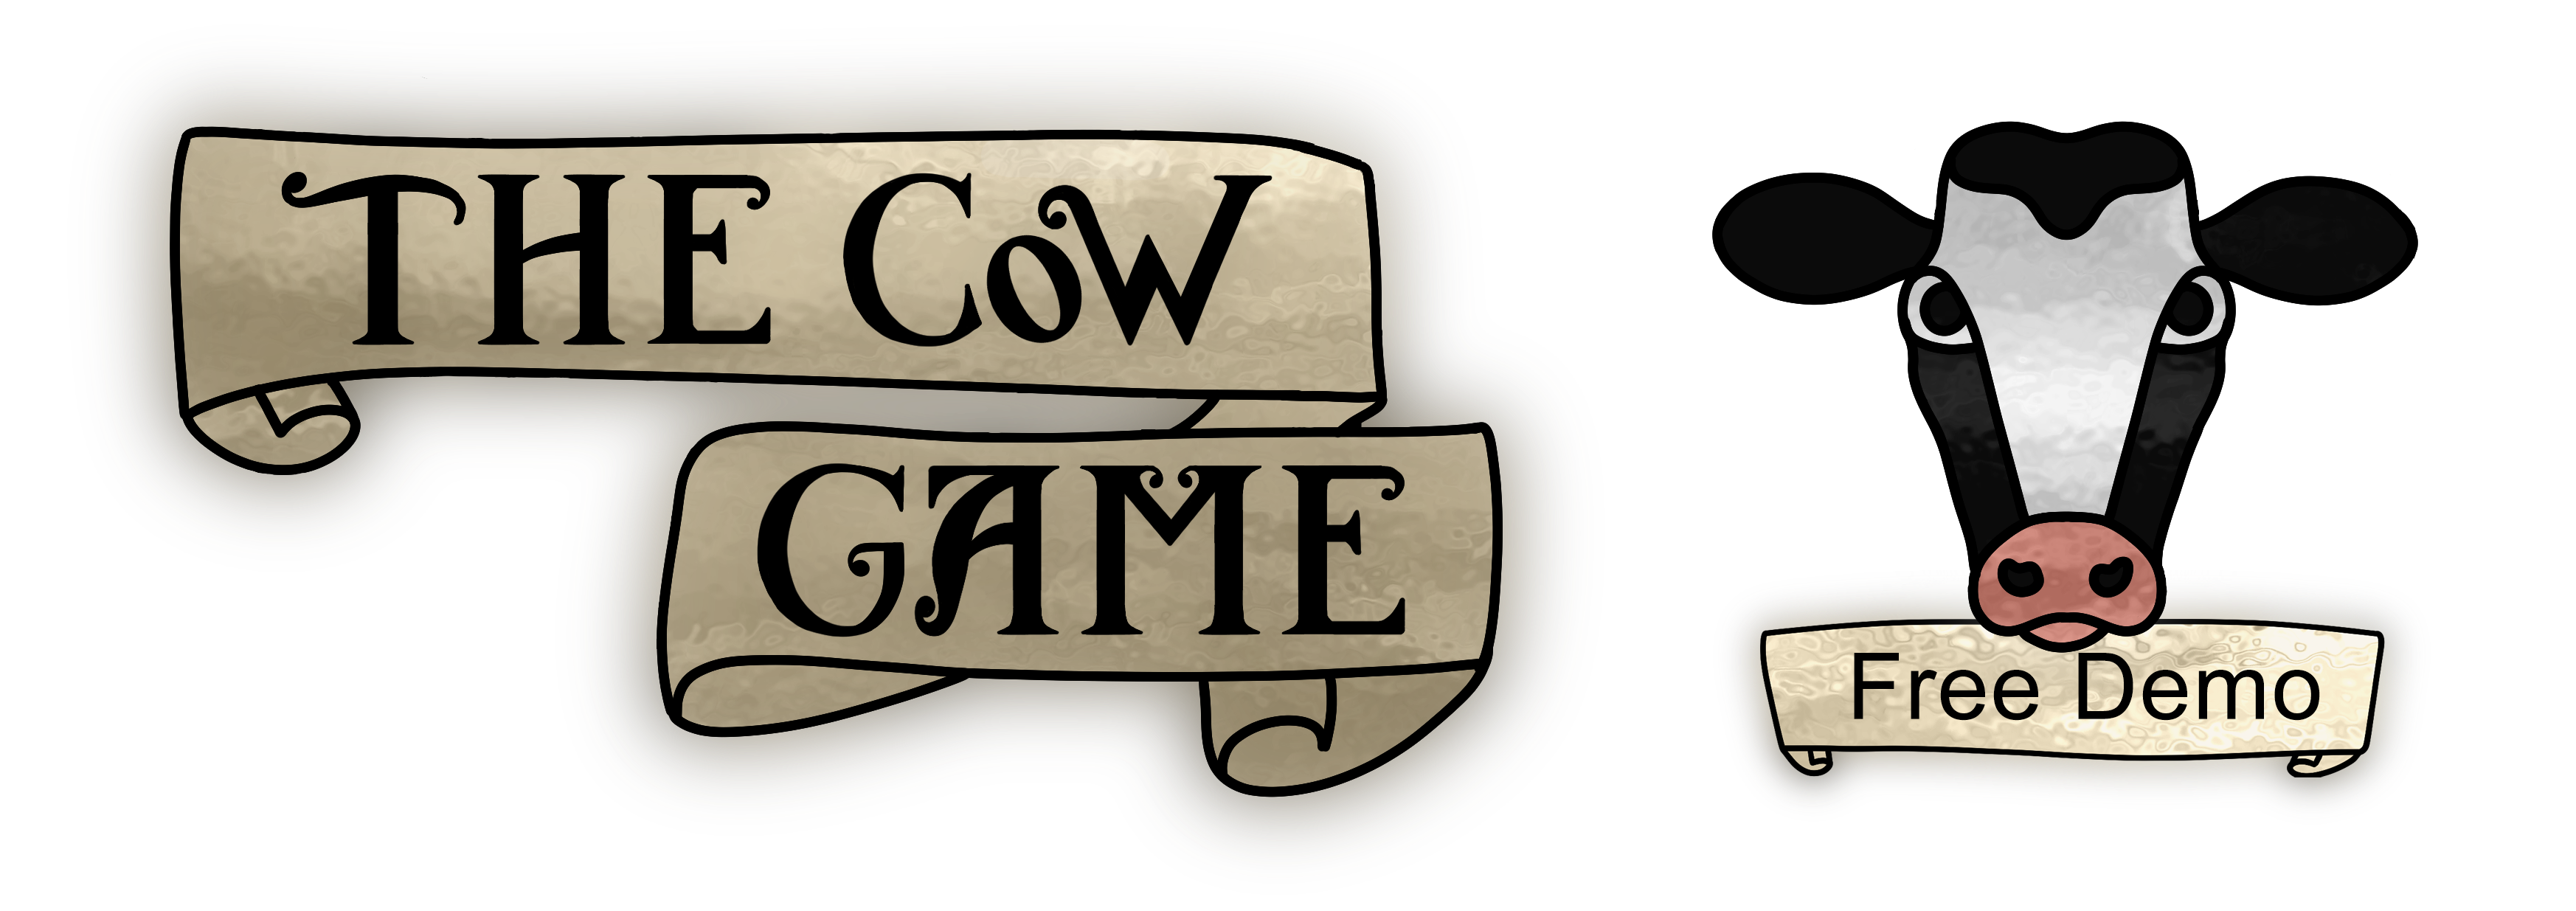 THE COW GAME | DEMO